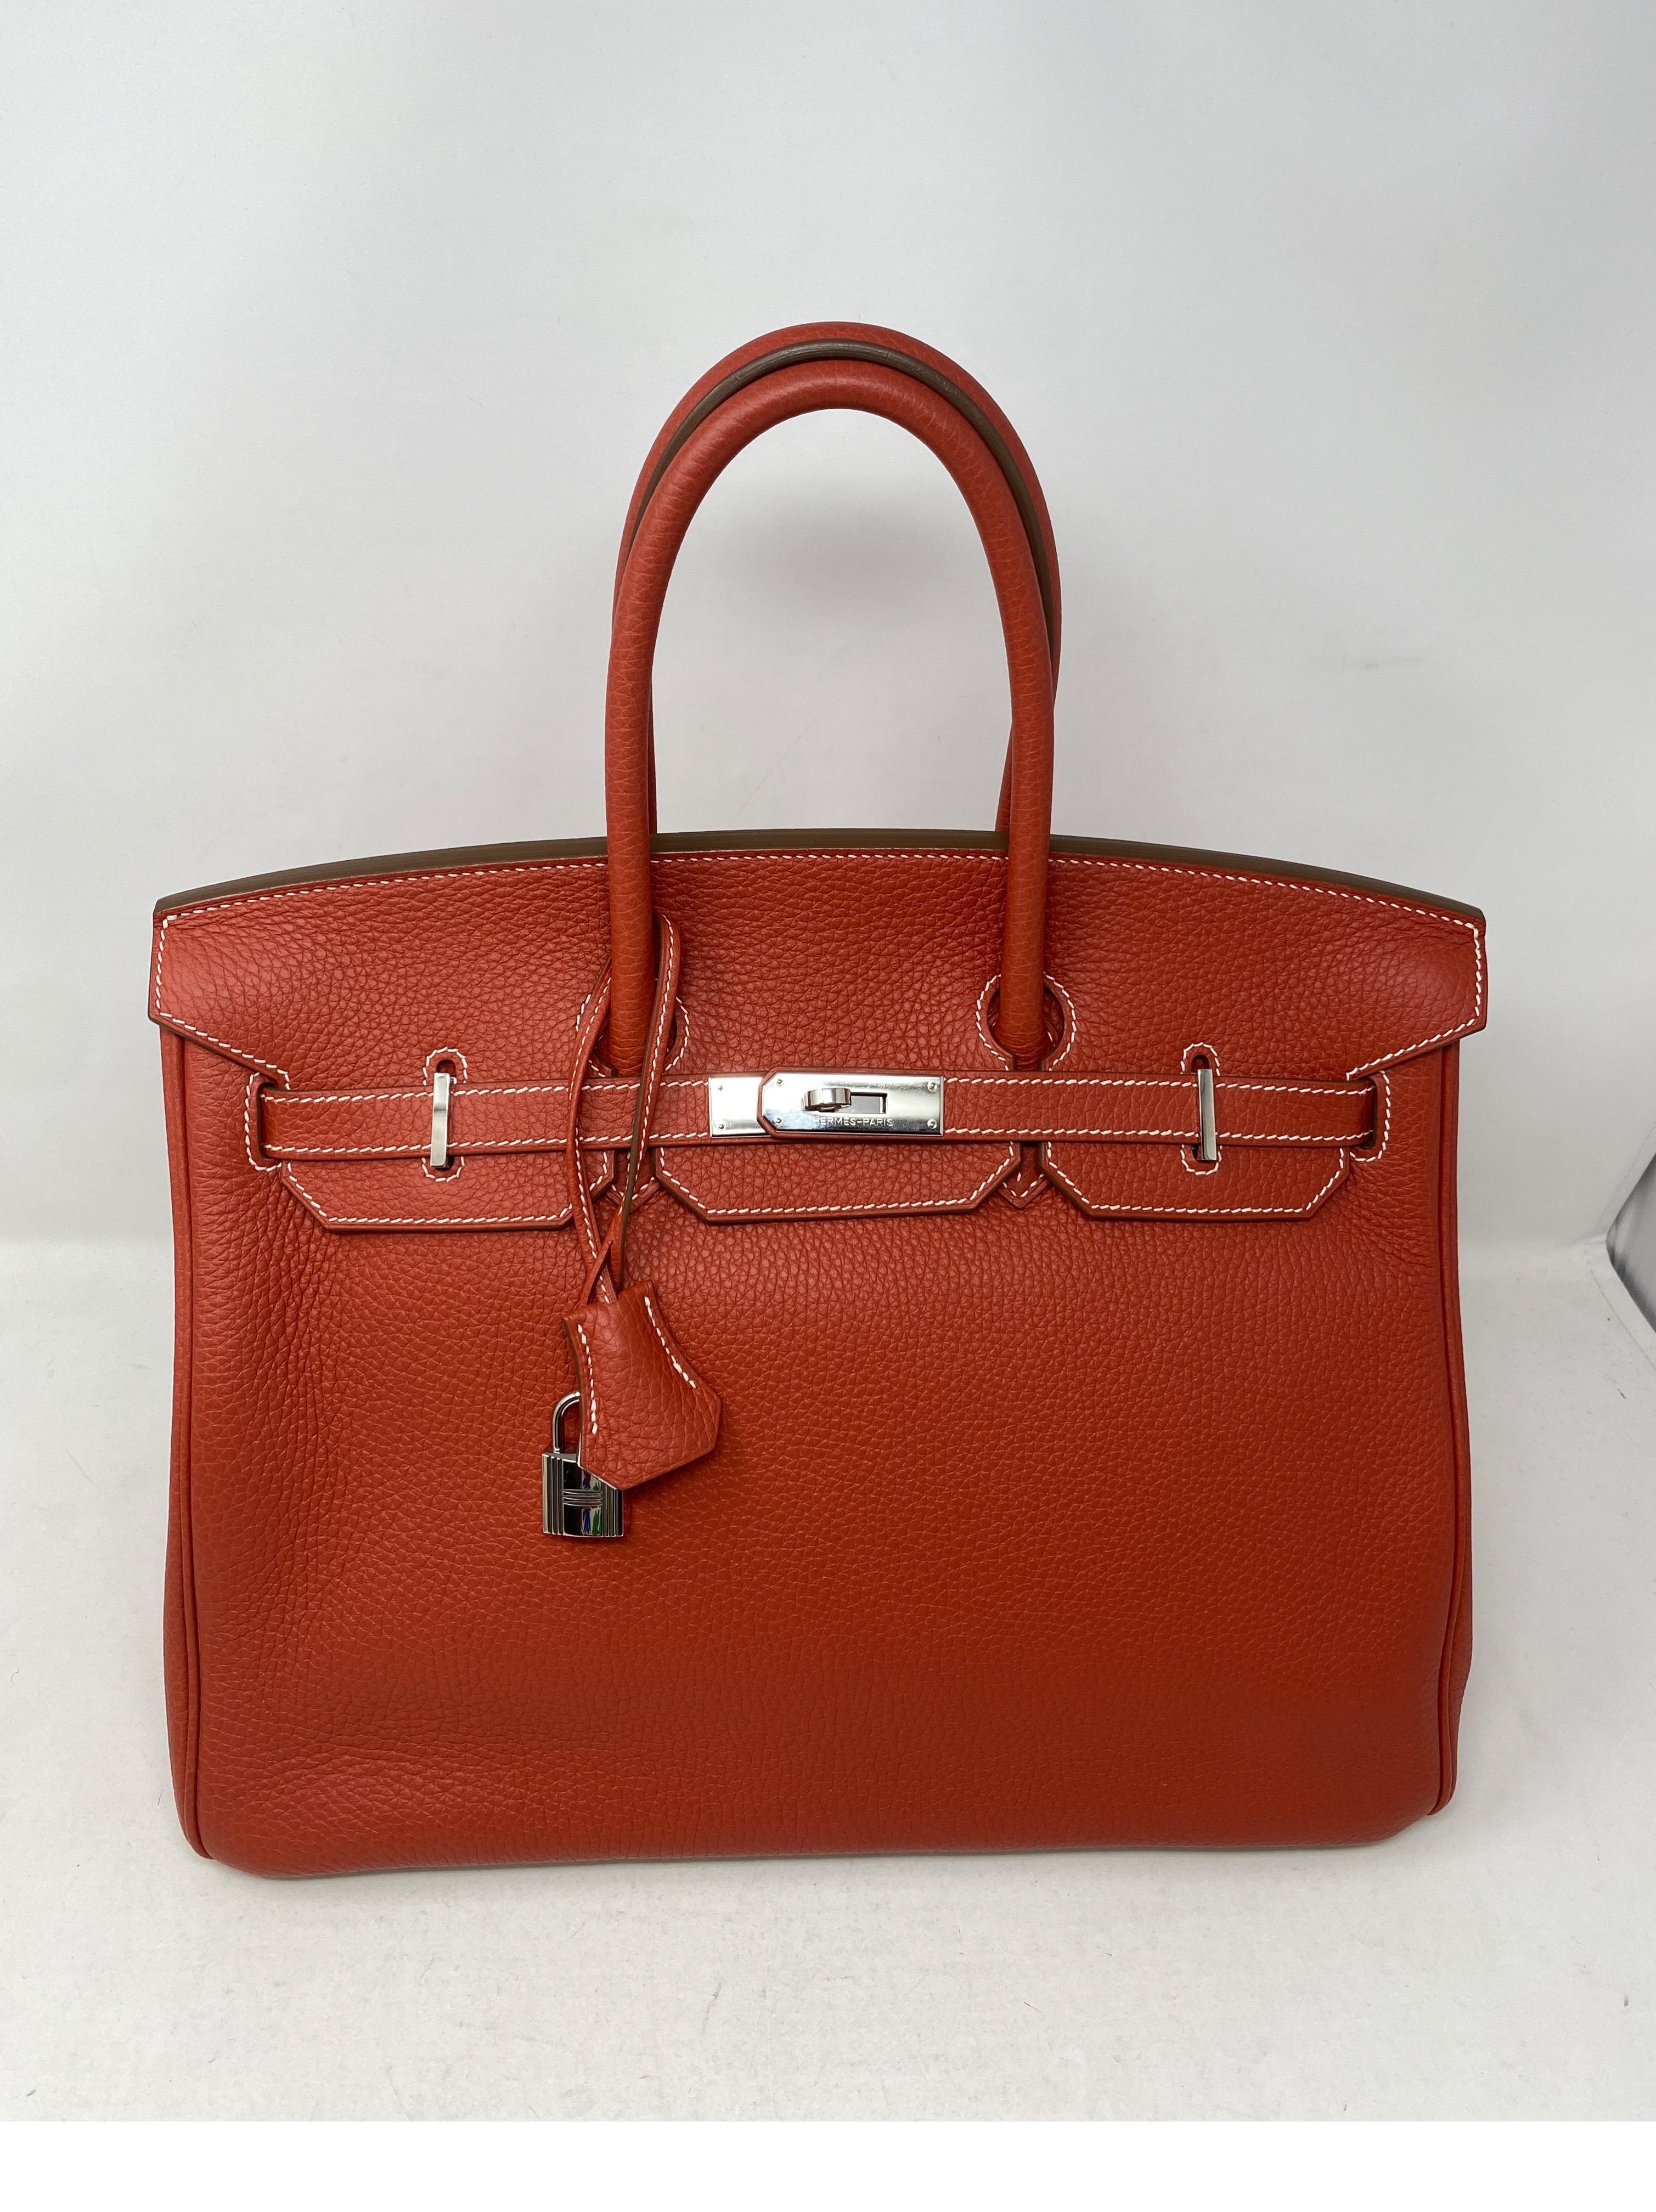 Hermes Sanguine Two Tone Birkin 35 Bag. Stunning sanguine red/ brick color with white interior. White leather on bottom. White contrast stitching. Excellent condition. Like new. Rare and limited edition. Palladium hardware. Plastic still on